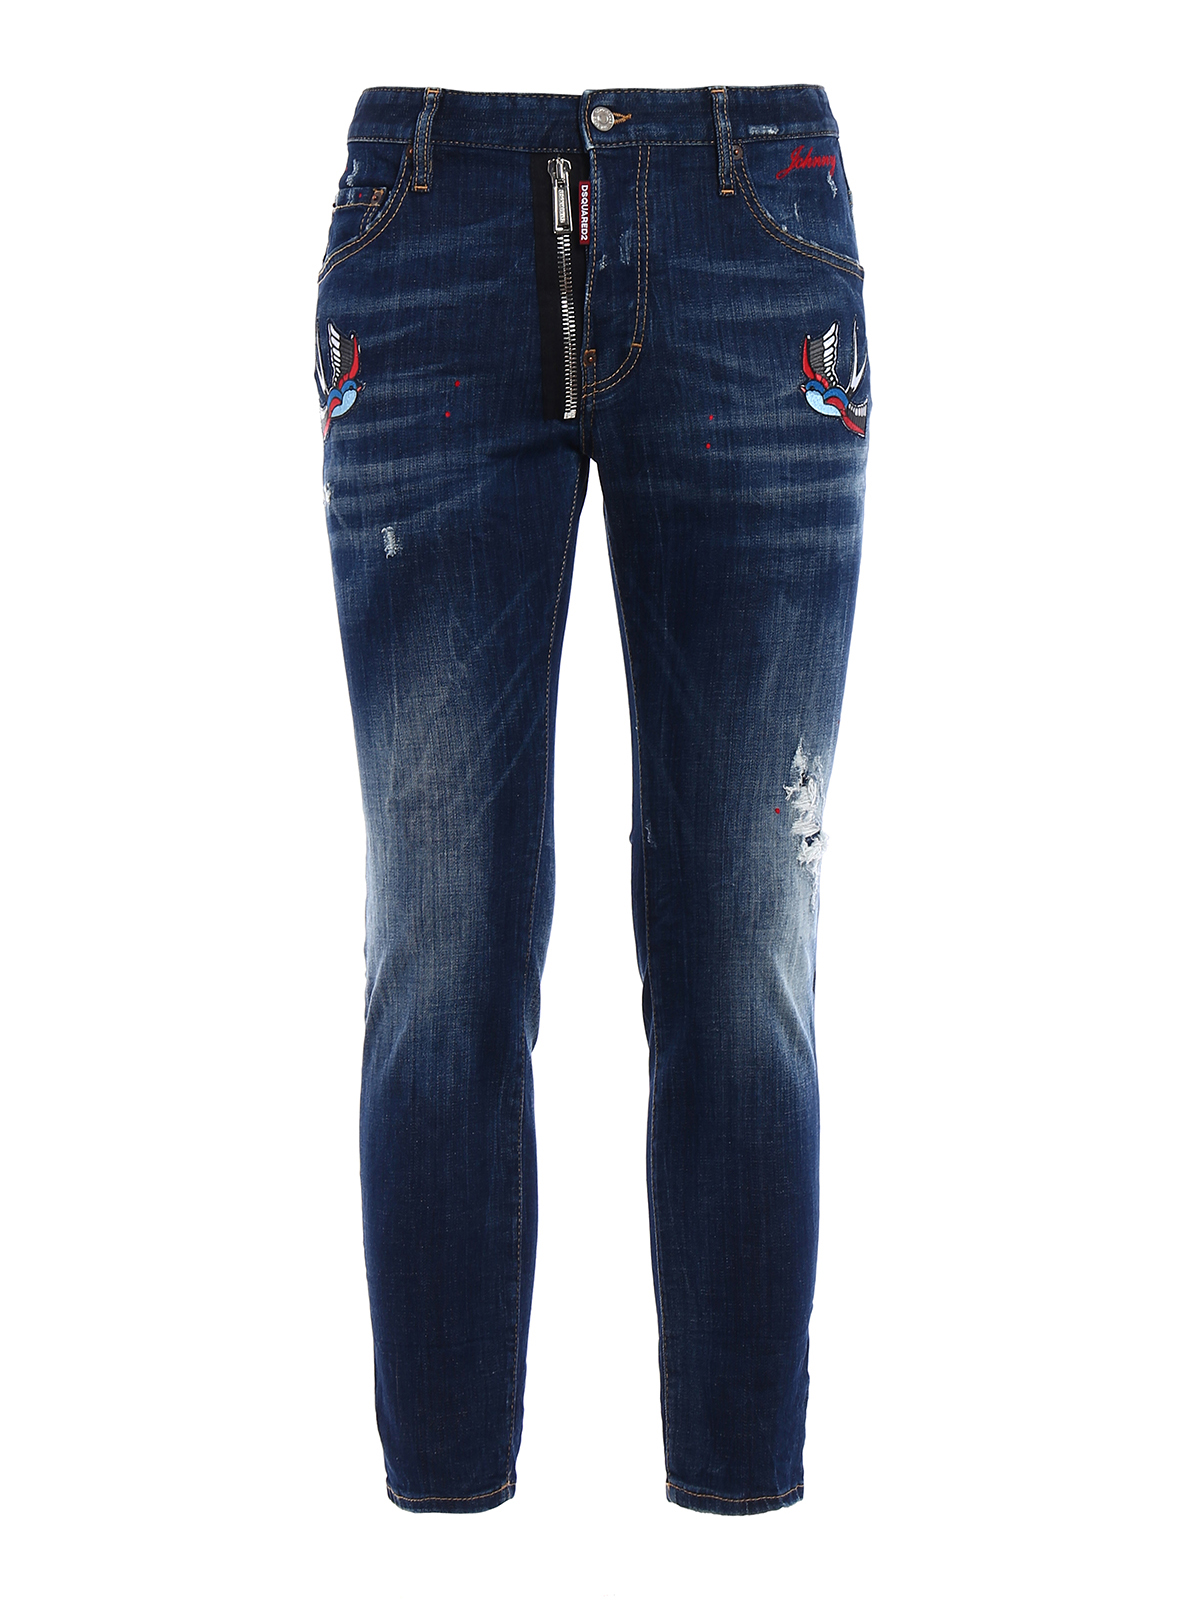 dsquared2 patch jeans